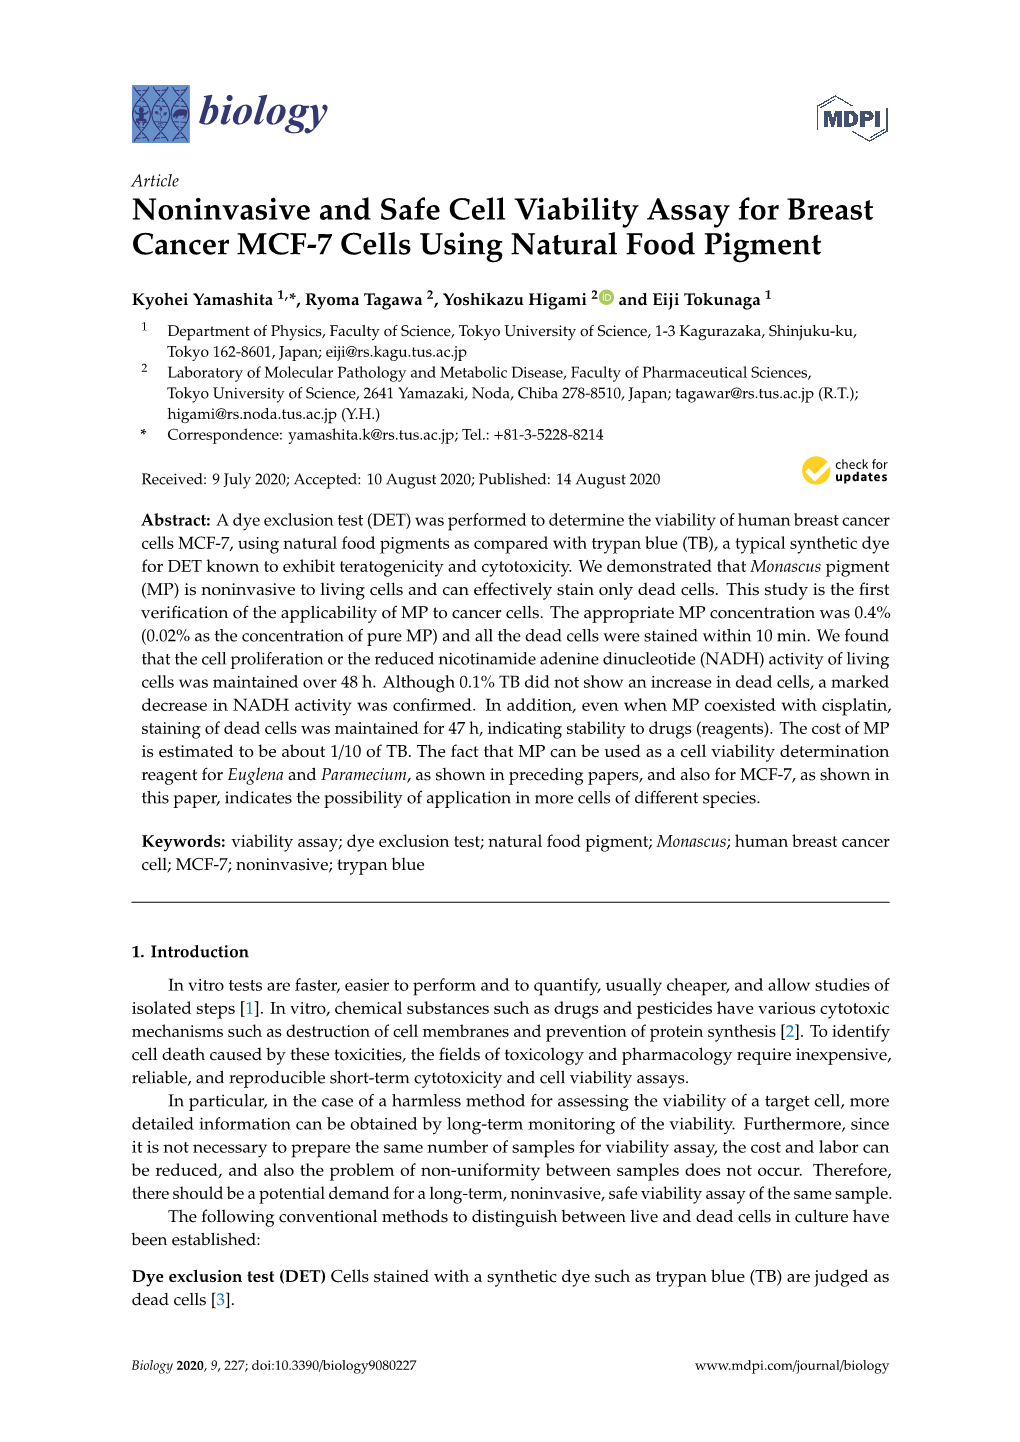 Noninvasive and Safe Cell Viability Assay for Breast Cancer MCF-7 Cells Using Natural Food Pigment